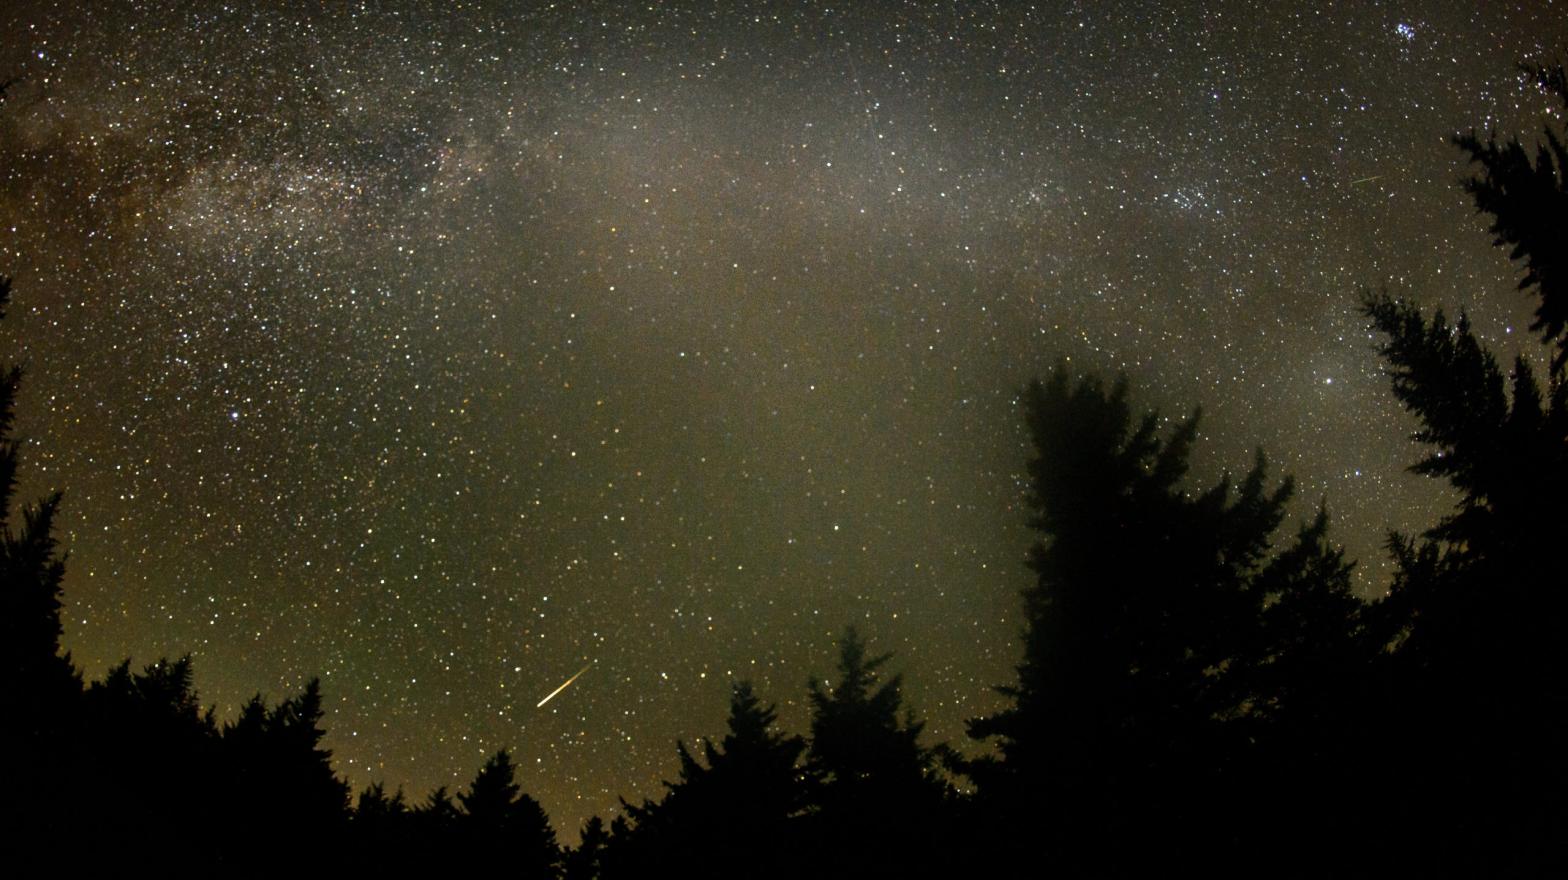 Imperceptibly small bits of dust from space fall to Earth in a perpetual microscopic meteor shower. (Image: NASA/Bill Ingalls)